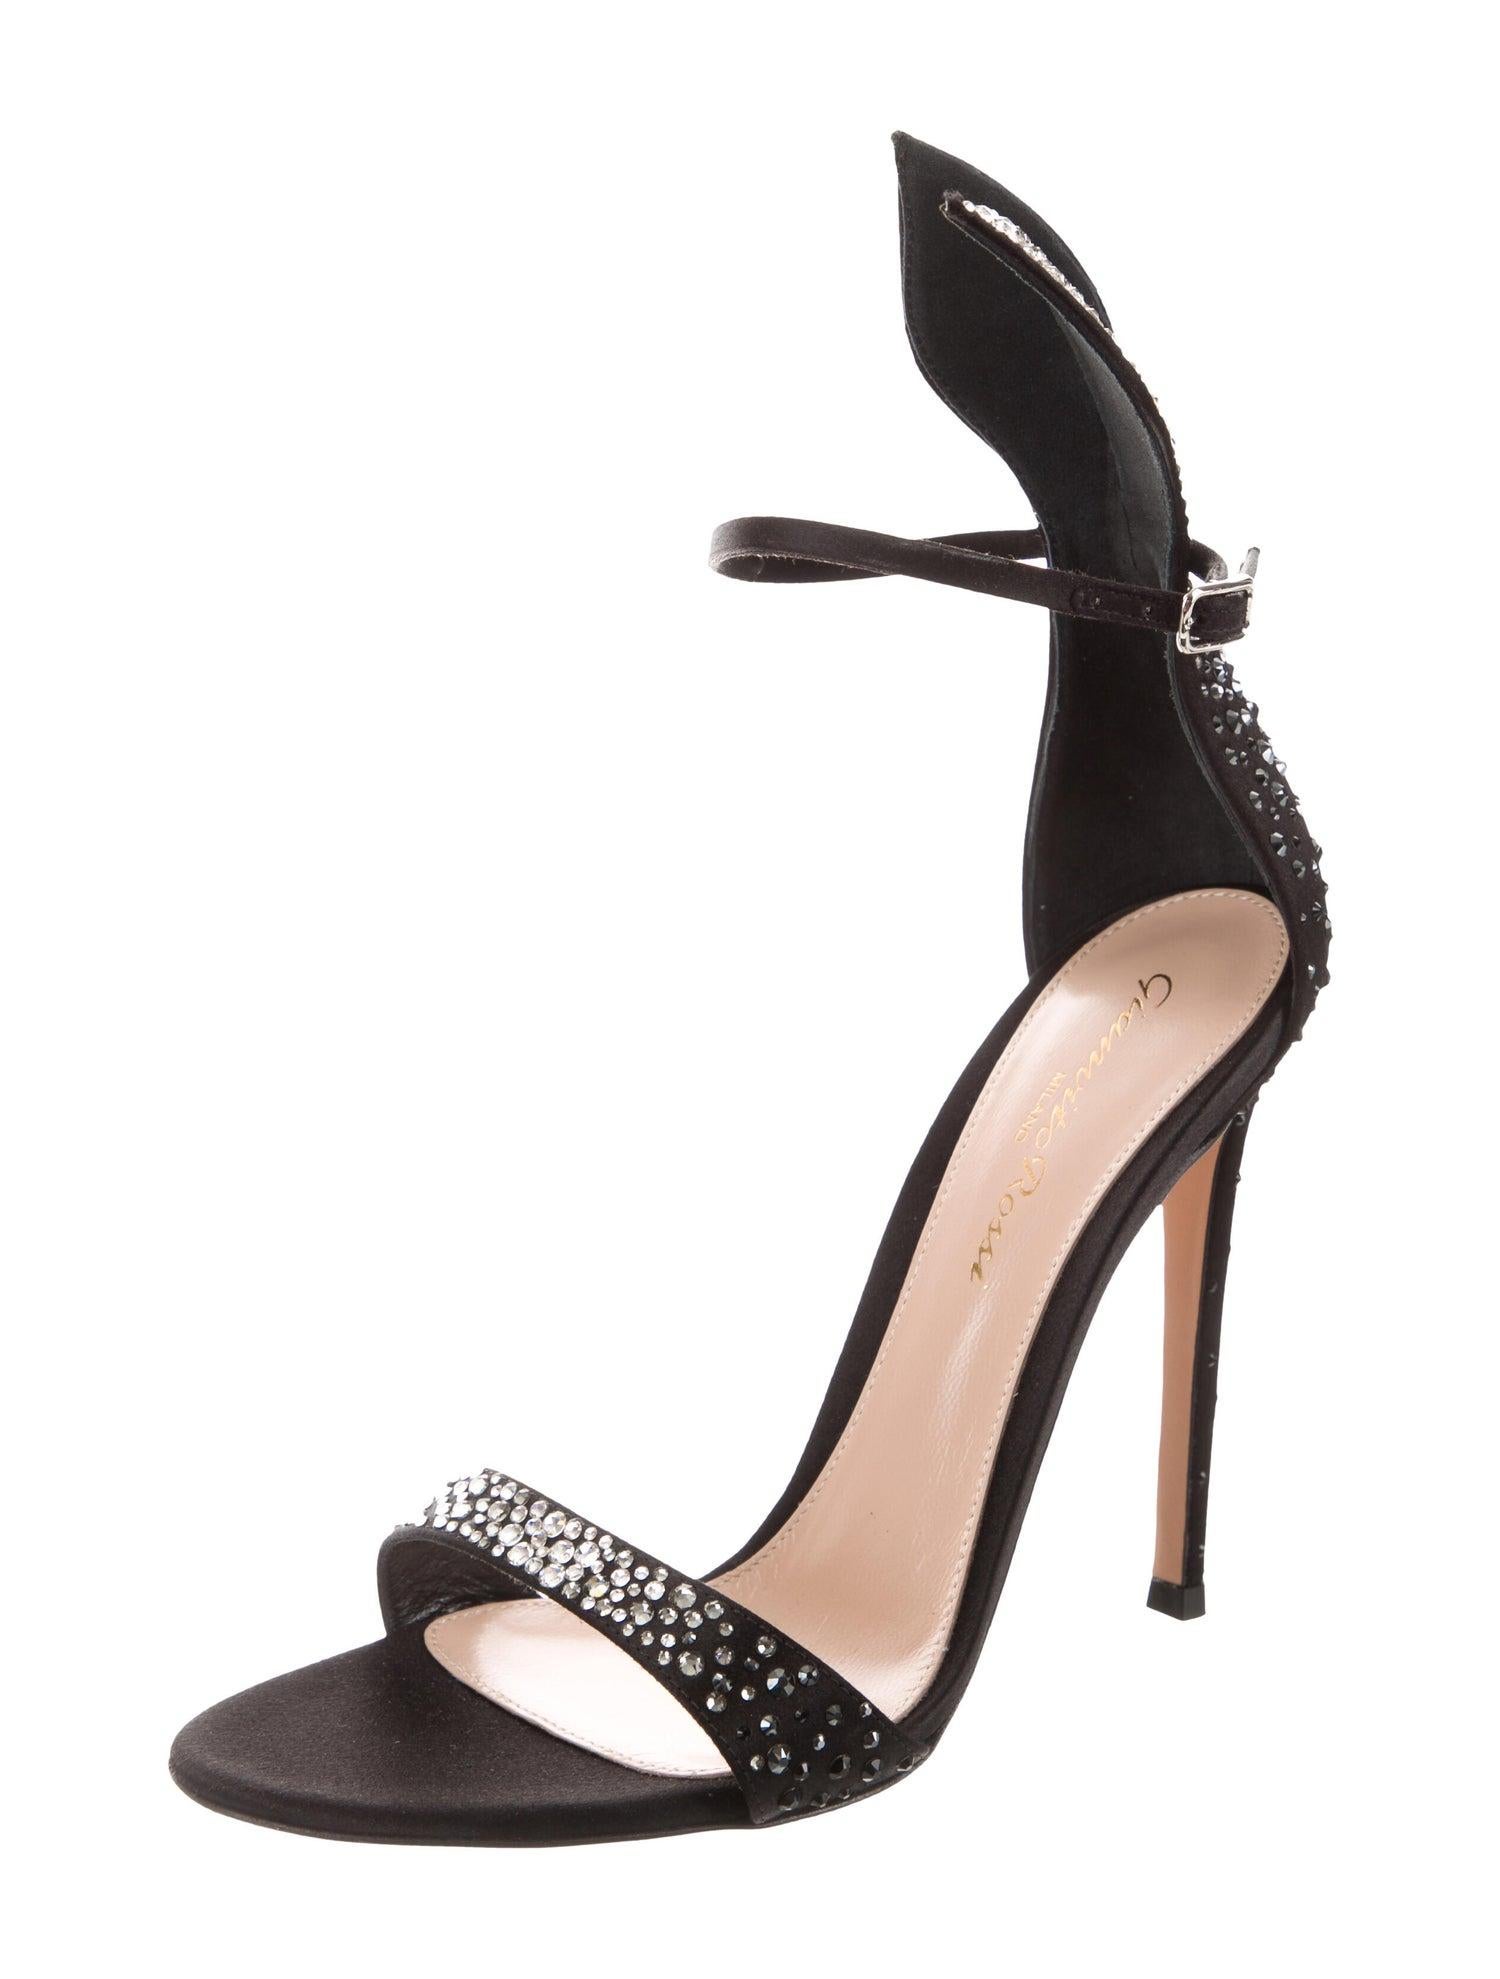 Women's Gianvito Rossi NEW Black Satin Crystal Strappy Evening Sandals Heels Pumps